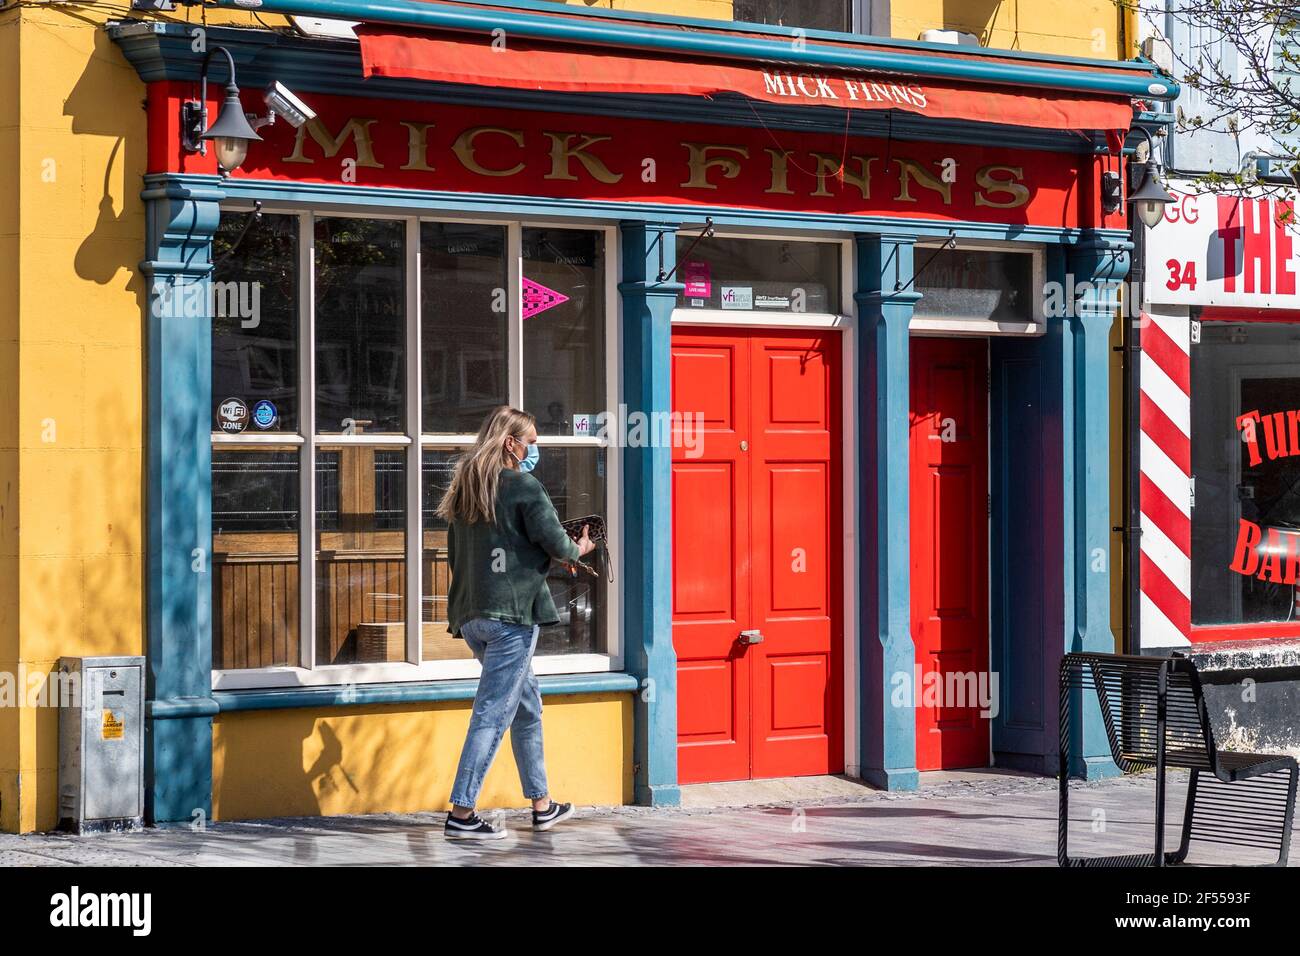 Clonakilty, West Cork, Ireland. 24th Mar, 2021. Mick Finns pub in Clonakilty remains closed due to the COVID-19 pandemic as publicans nationwide want all pubs to reopen. Landlords want no distinction between pubs serving food and so called 'wet' pubs. Credit: AG News/Alamy Live News Stock Photo